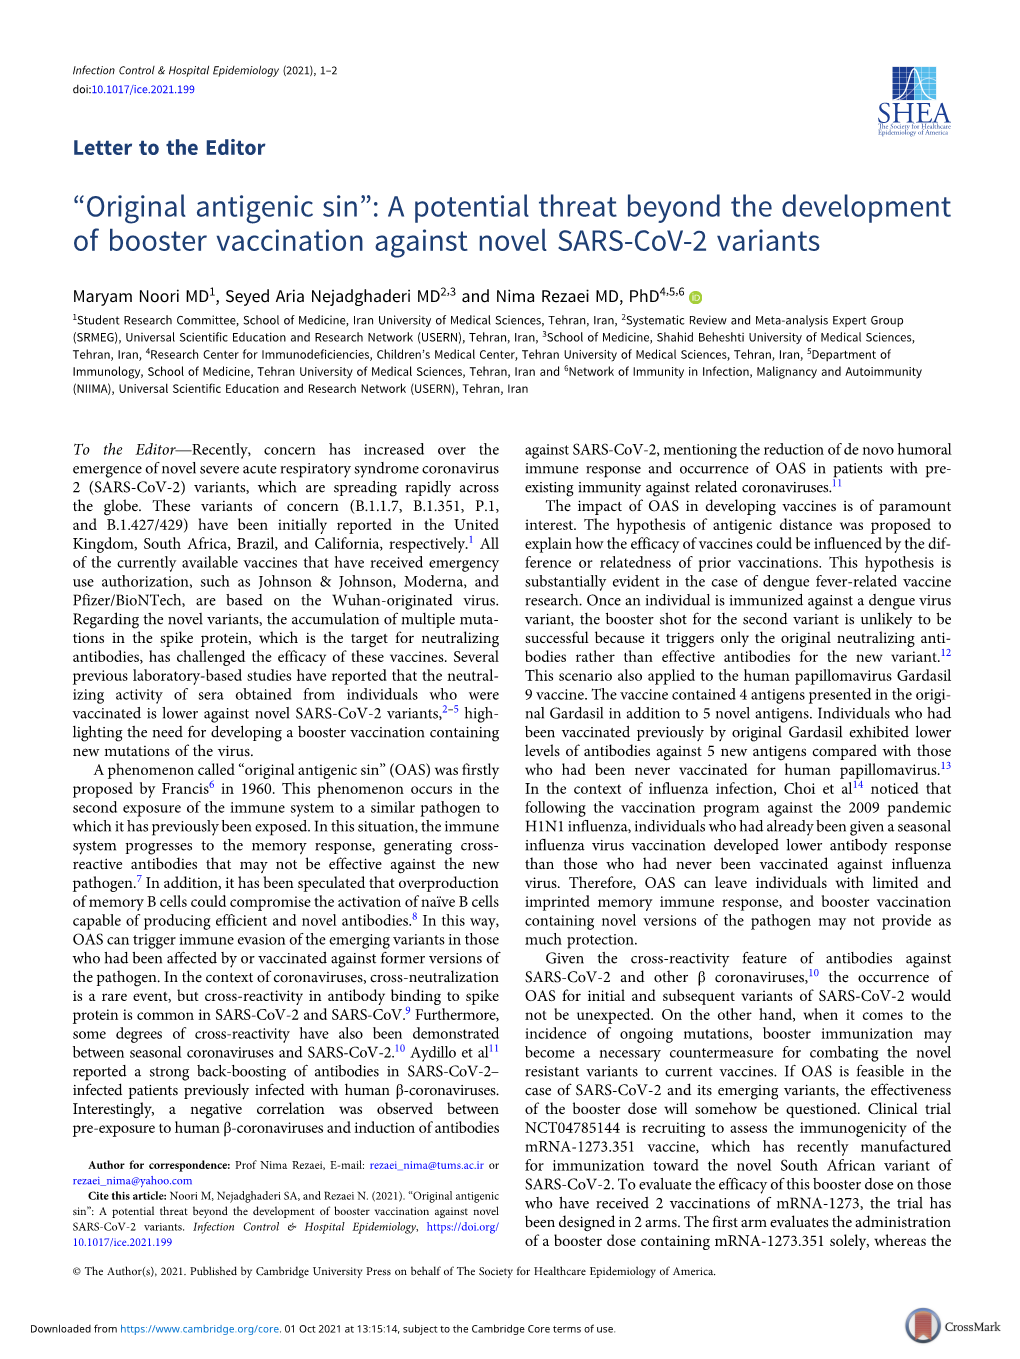 Original Antigenic Sin”: a Potential Threat Beyond the Development of Booster Vaccination Against Novel SARS-Cov-2 Variants